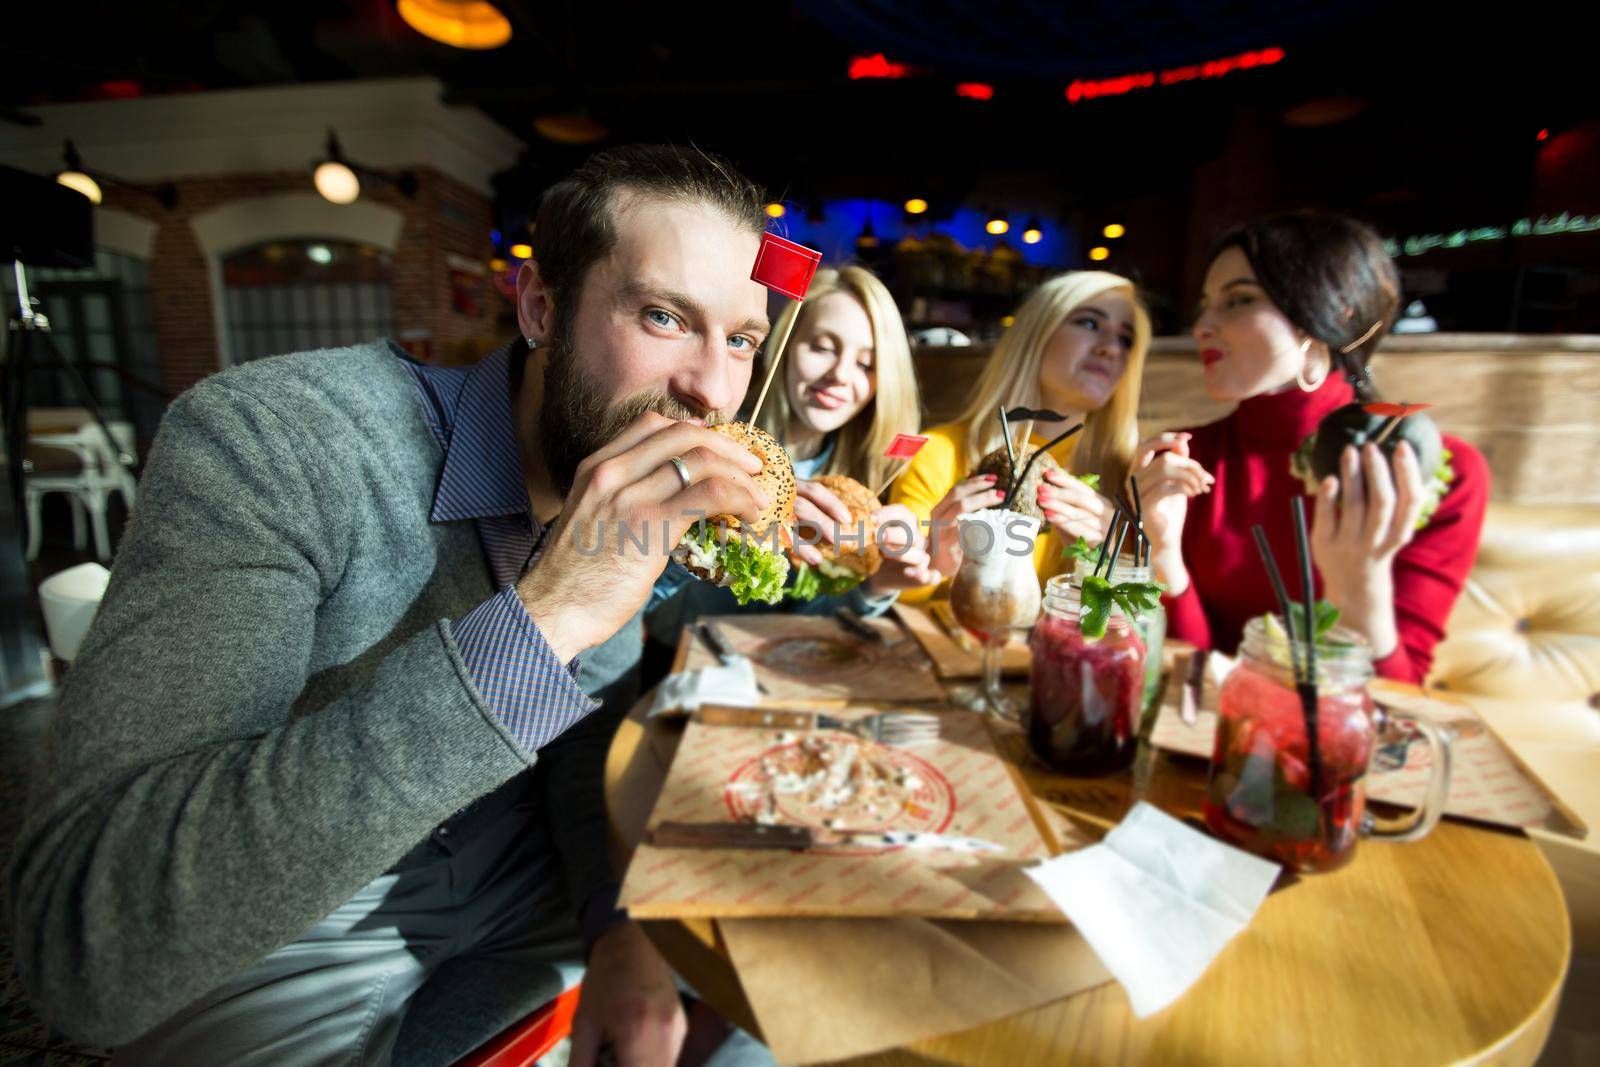 The man takes a bite of his Burger and looking at the camera. Beautiful women laugh and communicate.